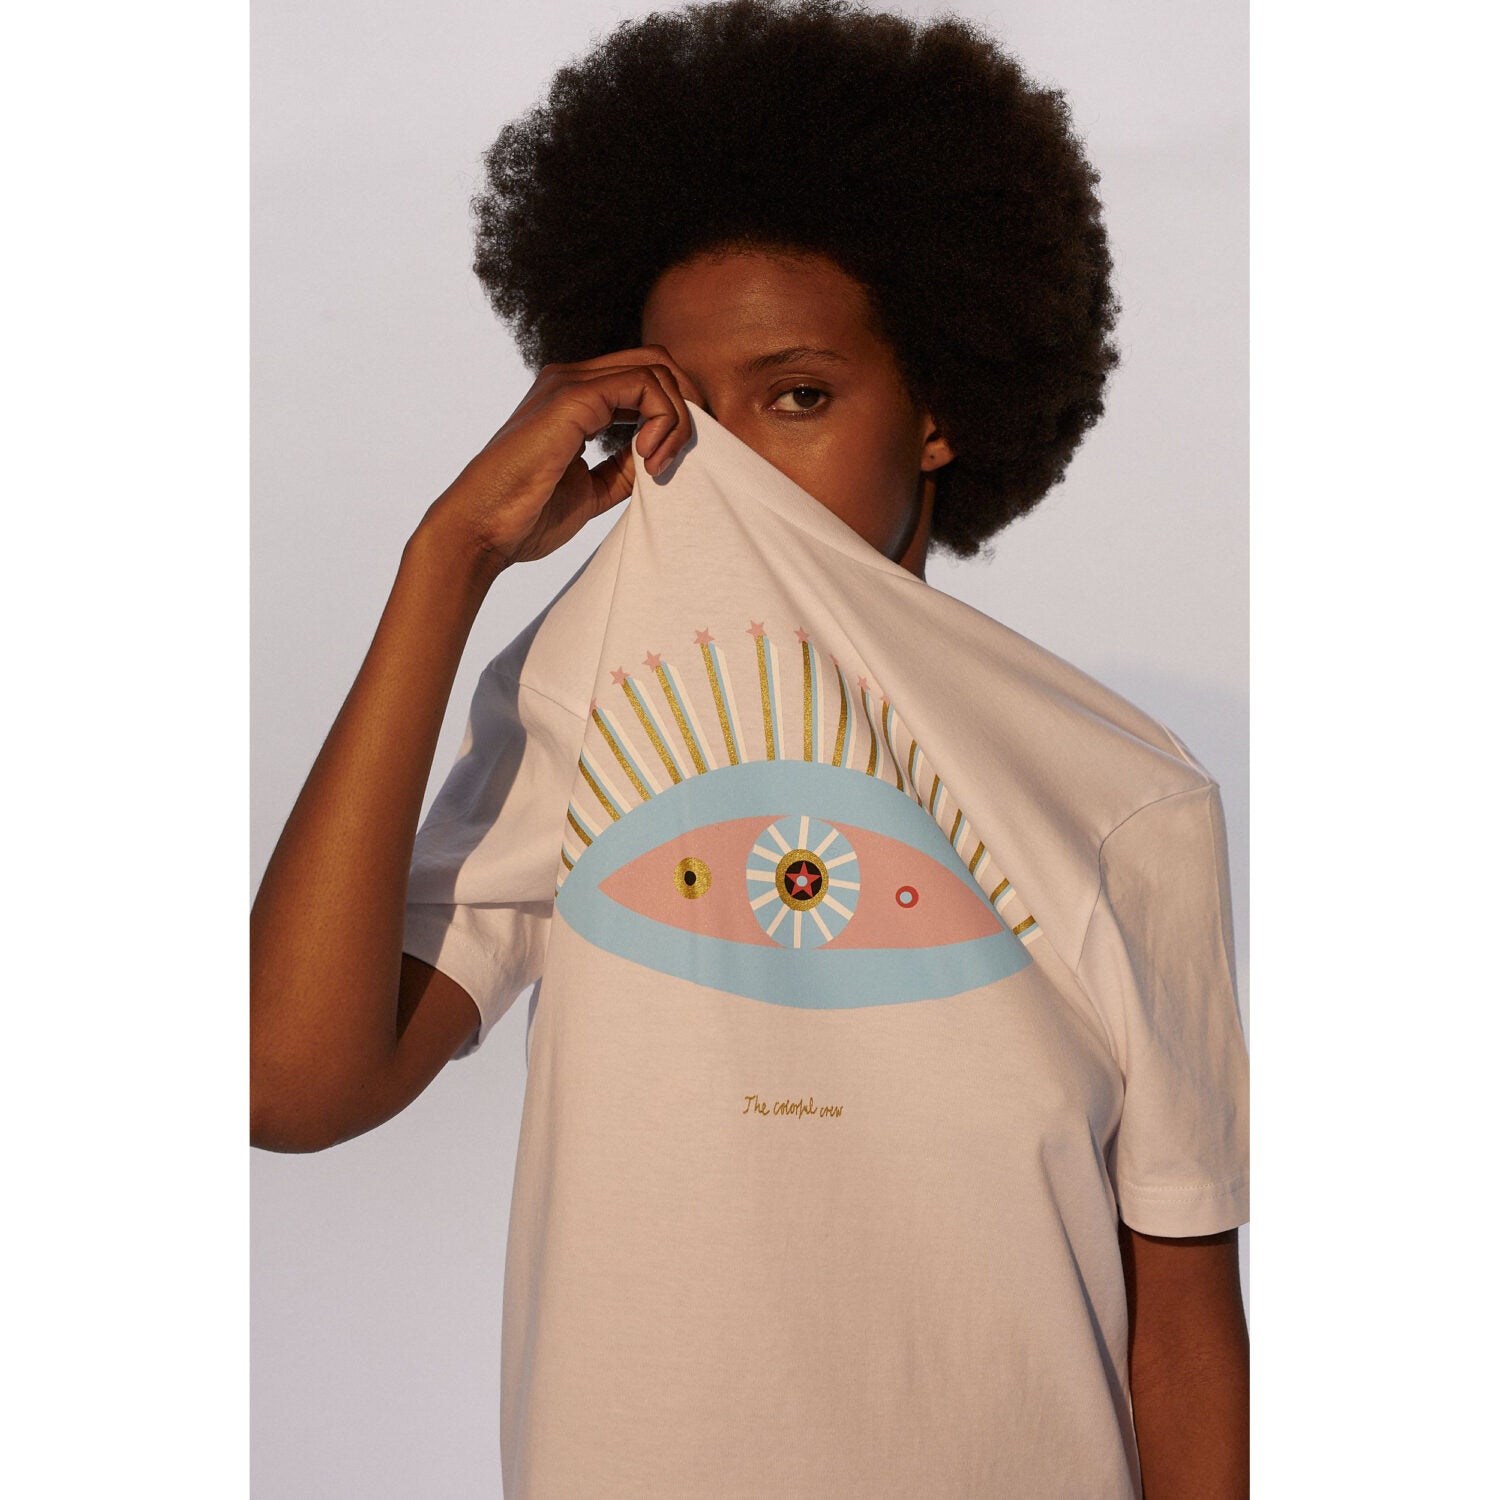 The colorful crew "Eye" T-Shirt